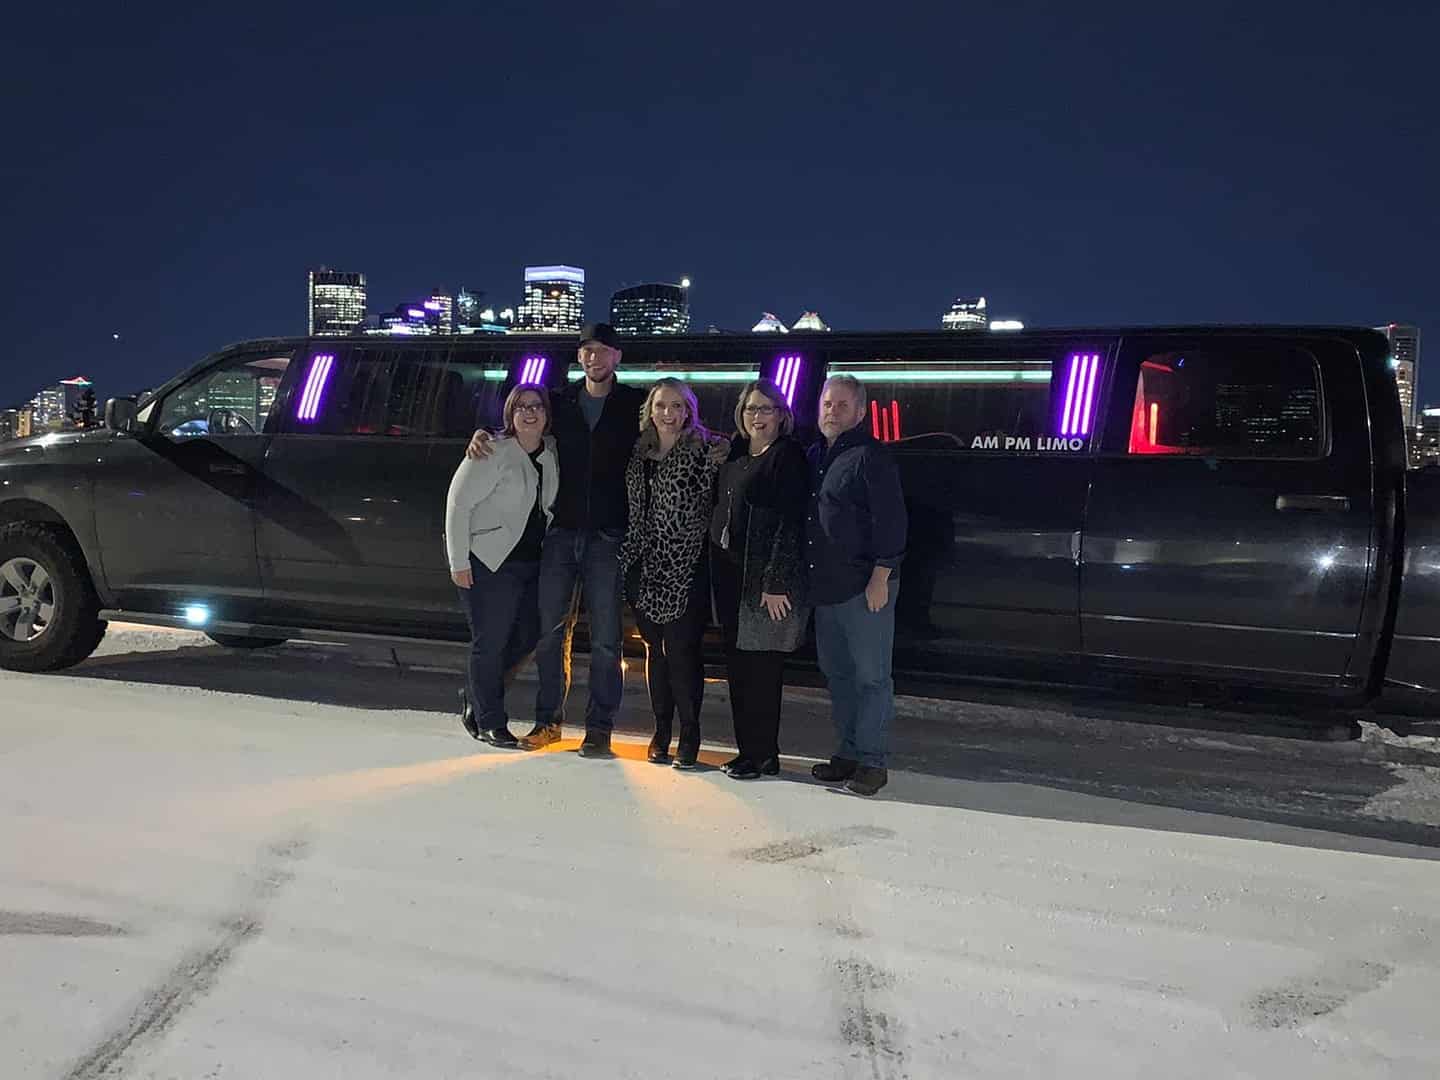 Small group smiling in front of Black Dodge Ram Limo